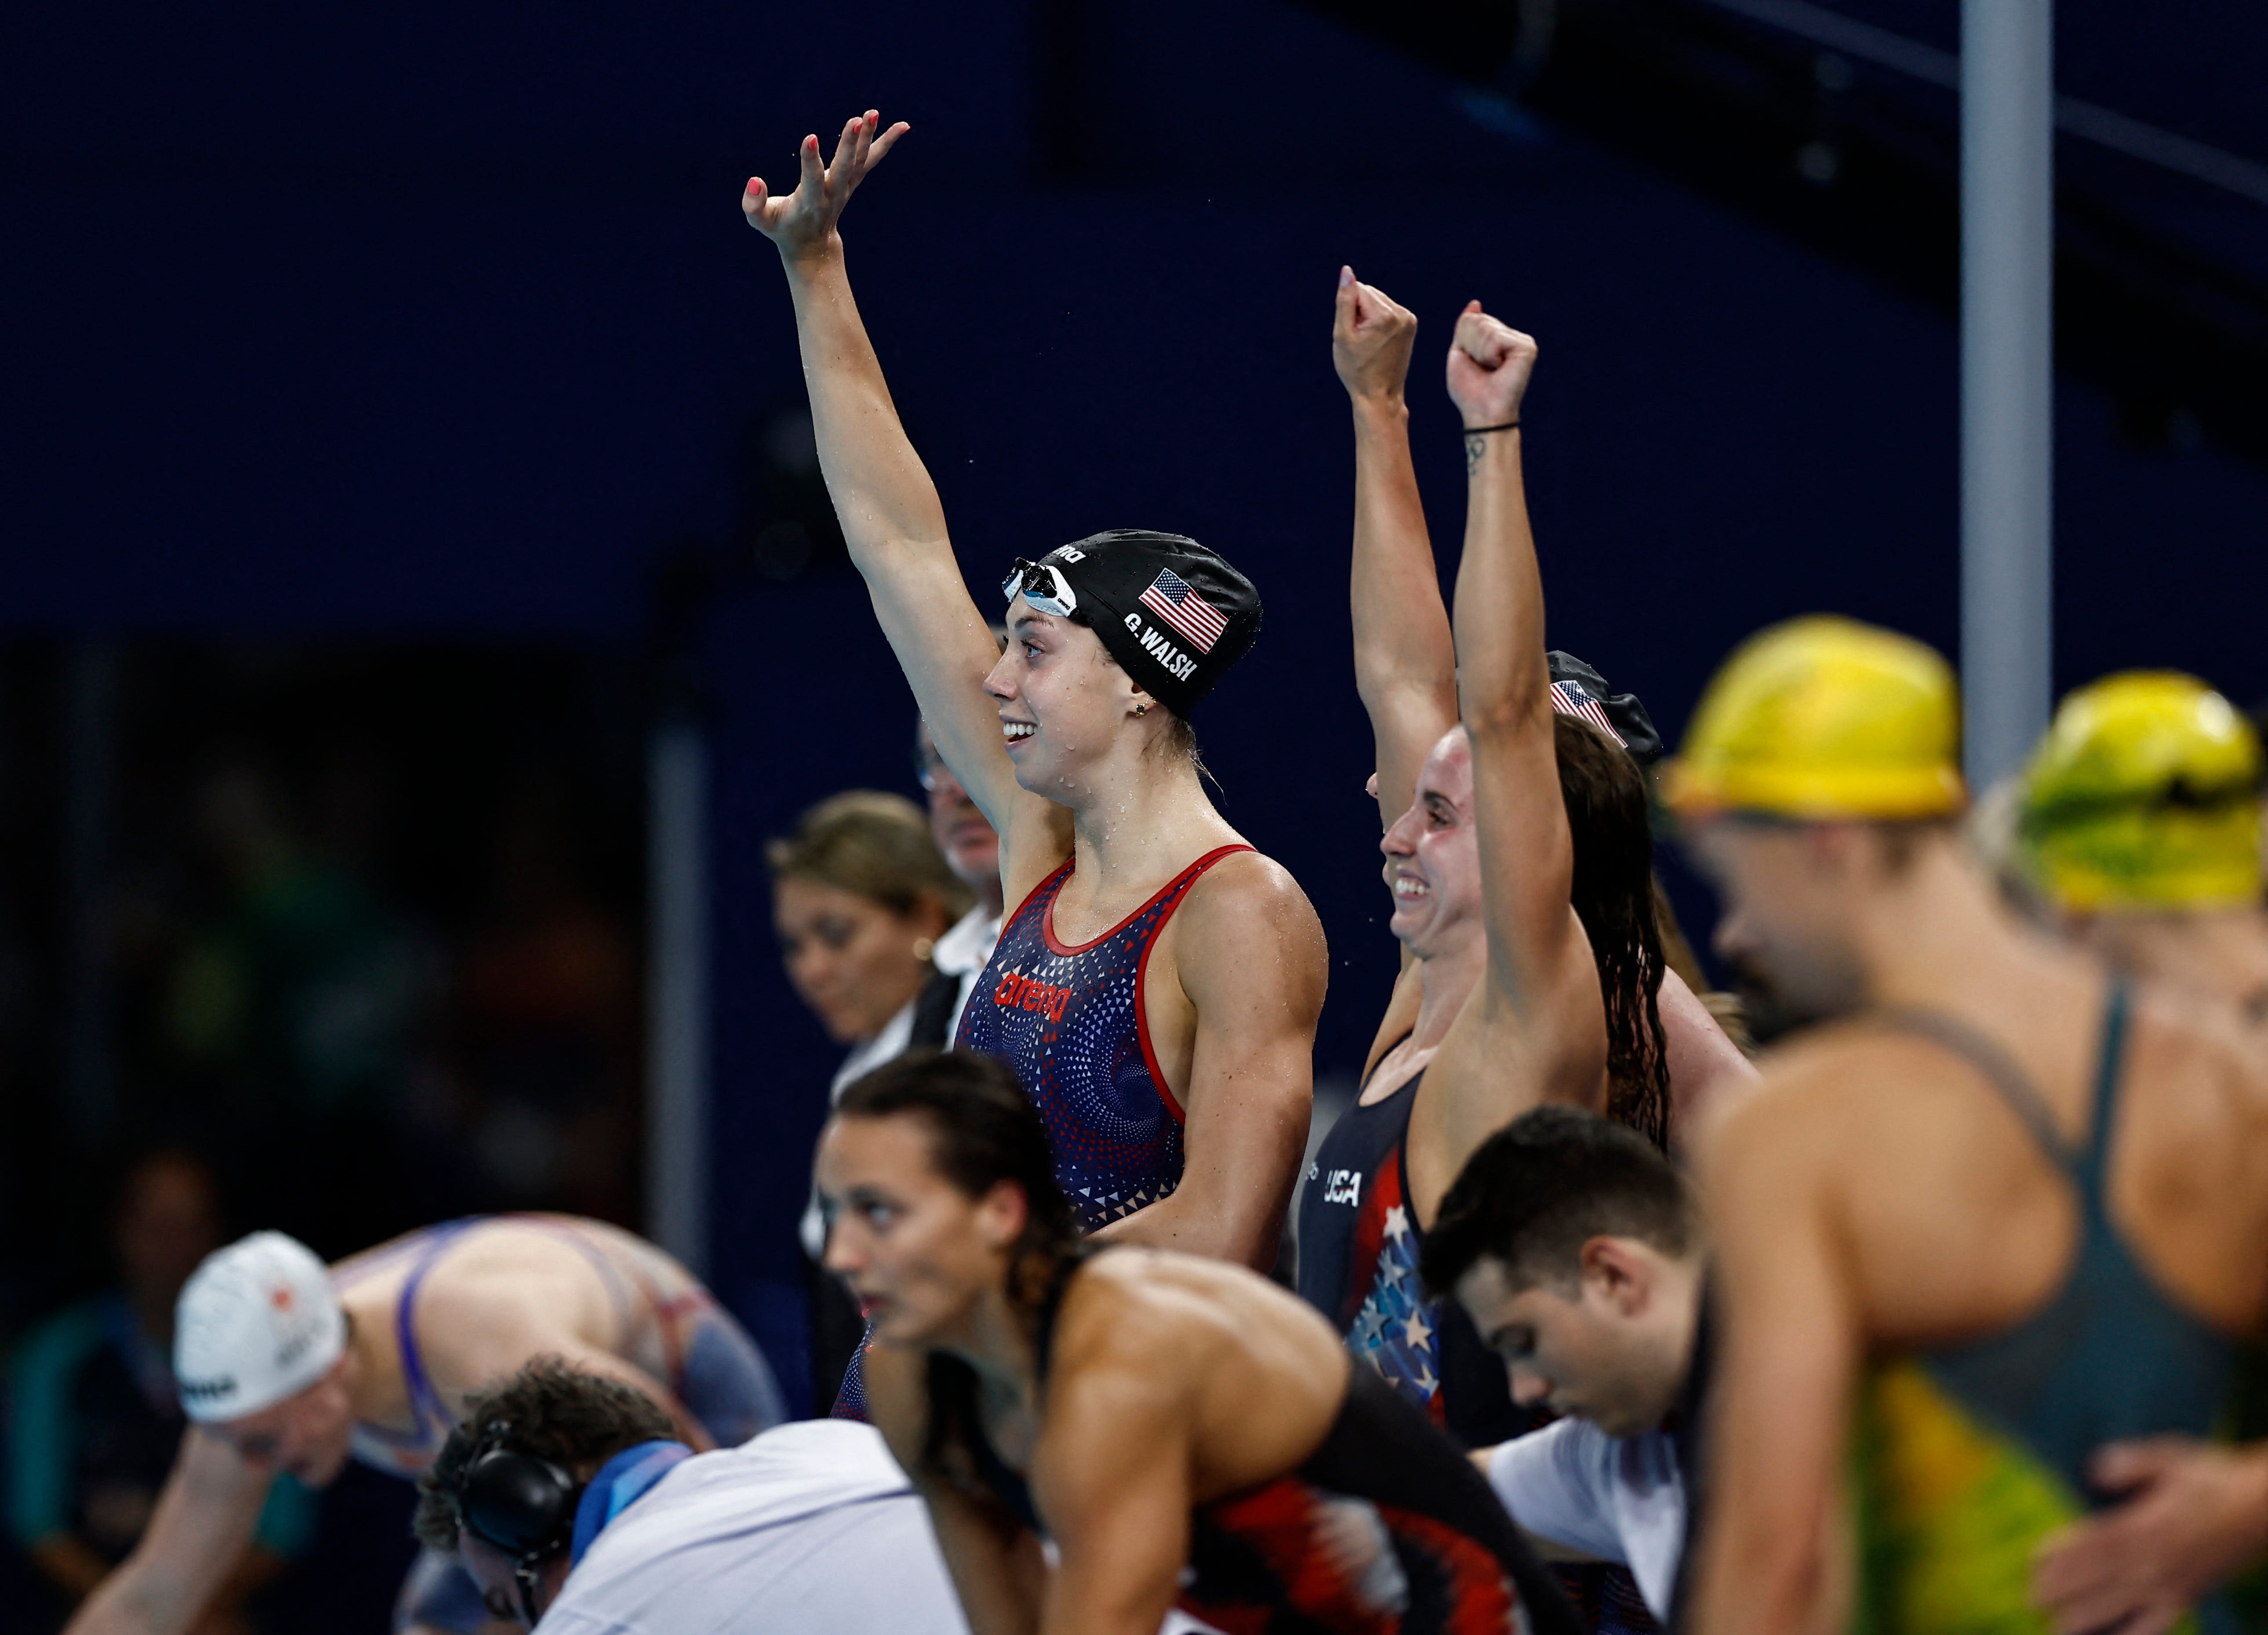 Gretchen Walsh helps U.S. Olympics swimming 400 medley relay to gold medal, world record